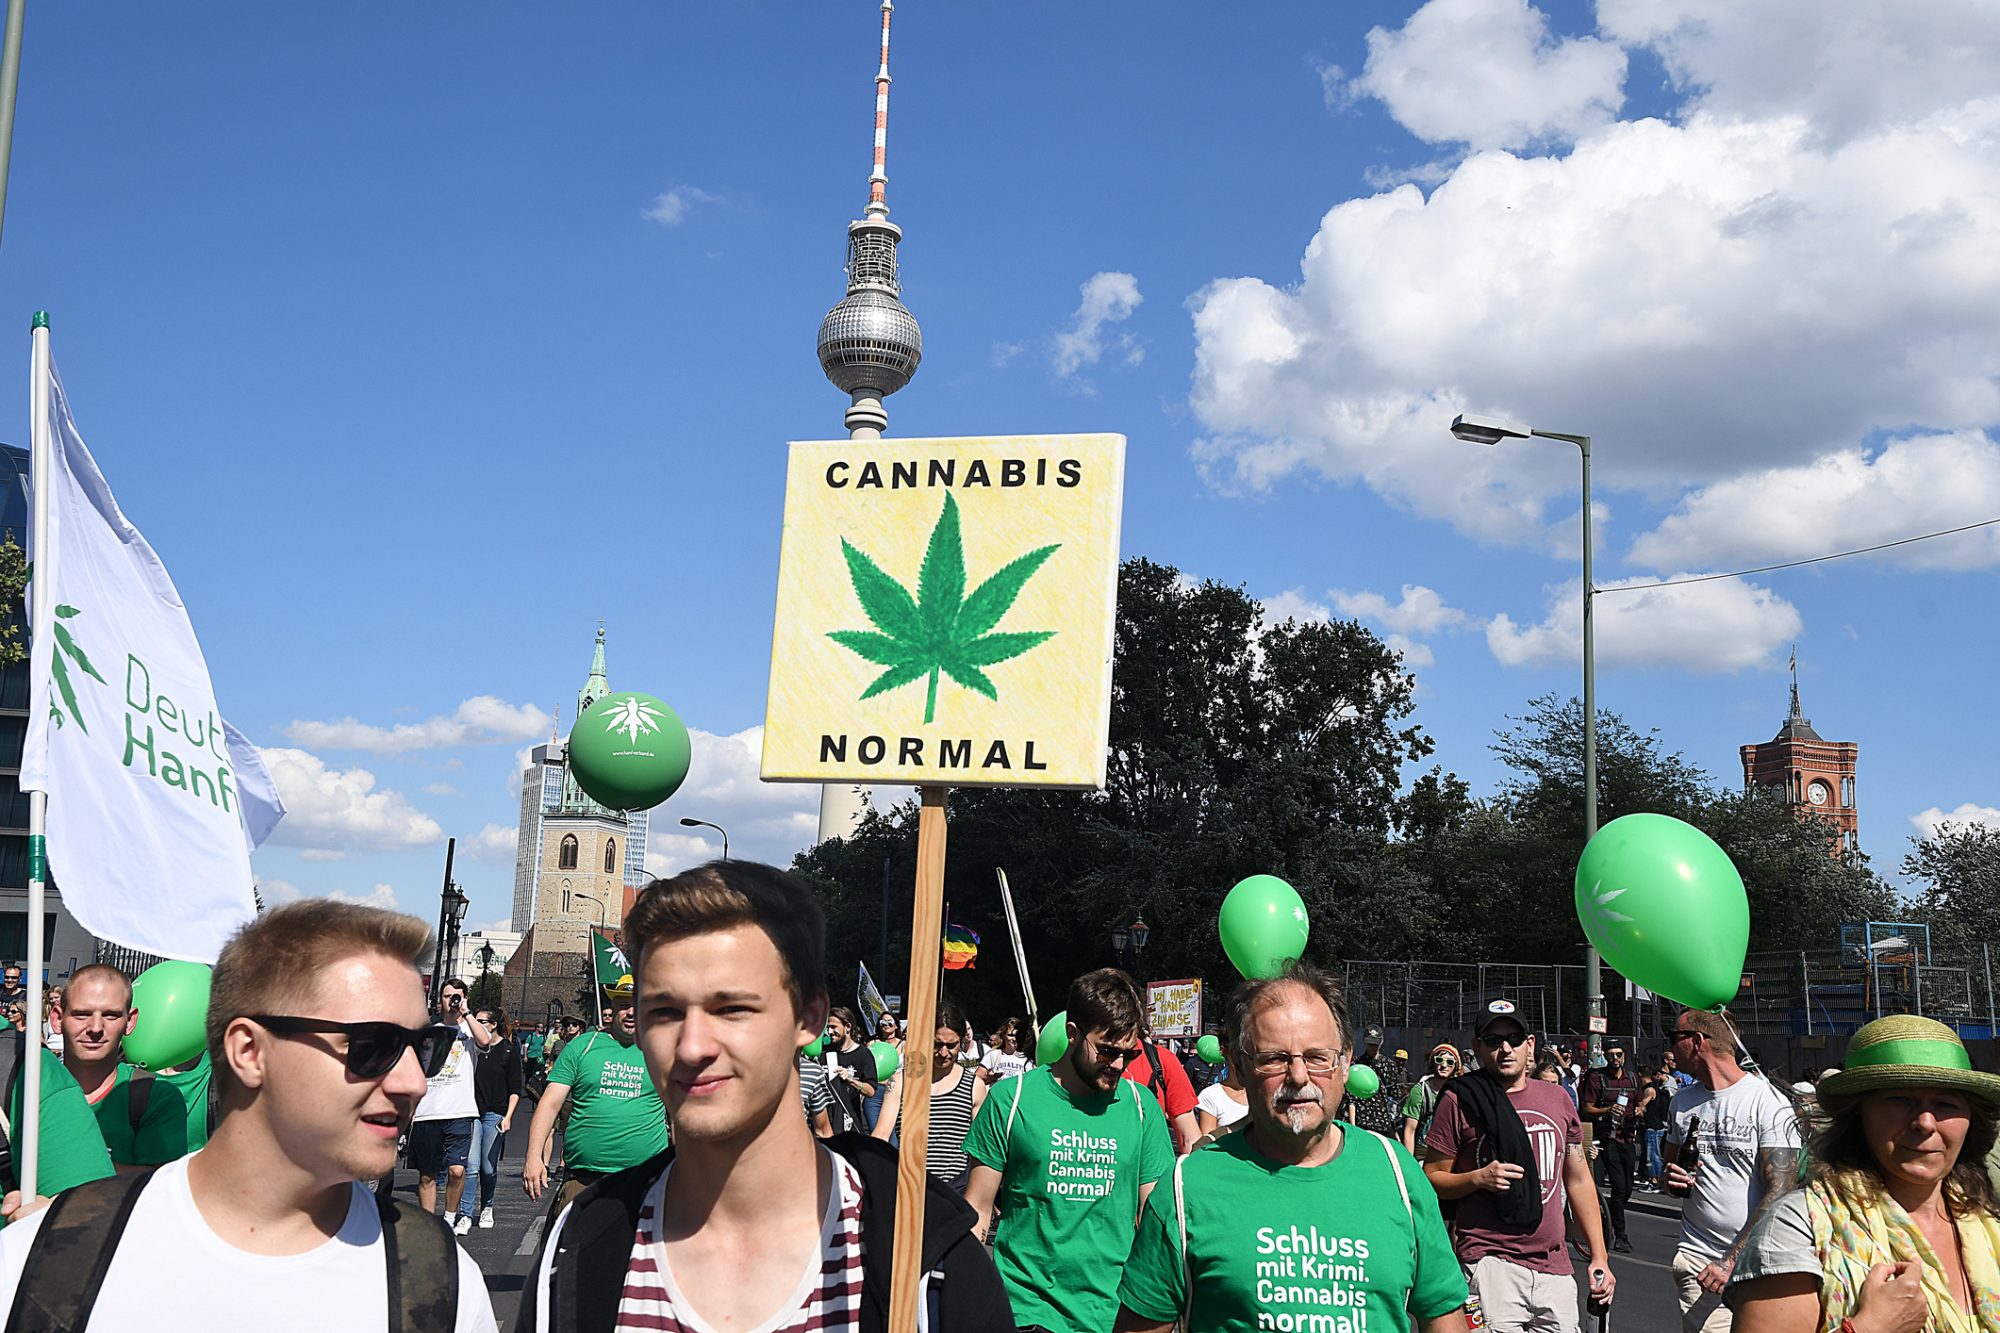 protest in Germany for the legalisation of cannabis